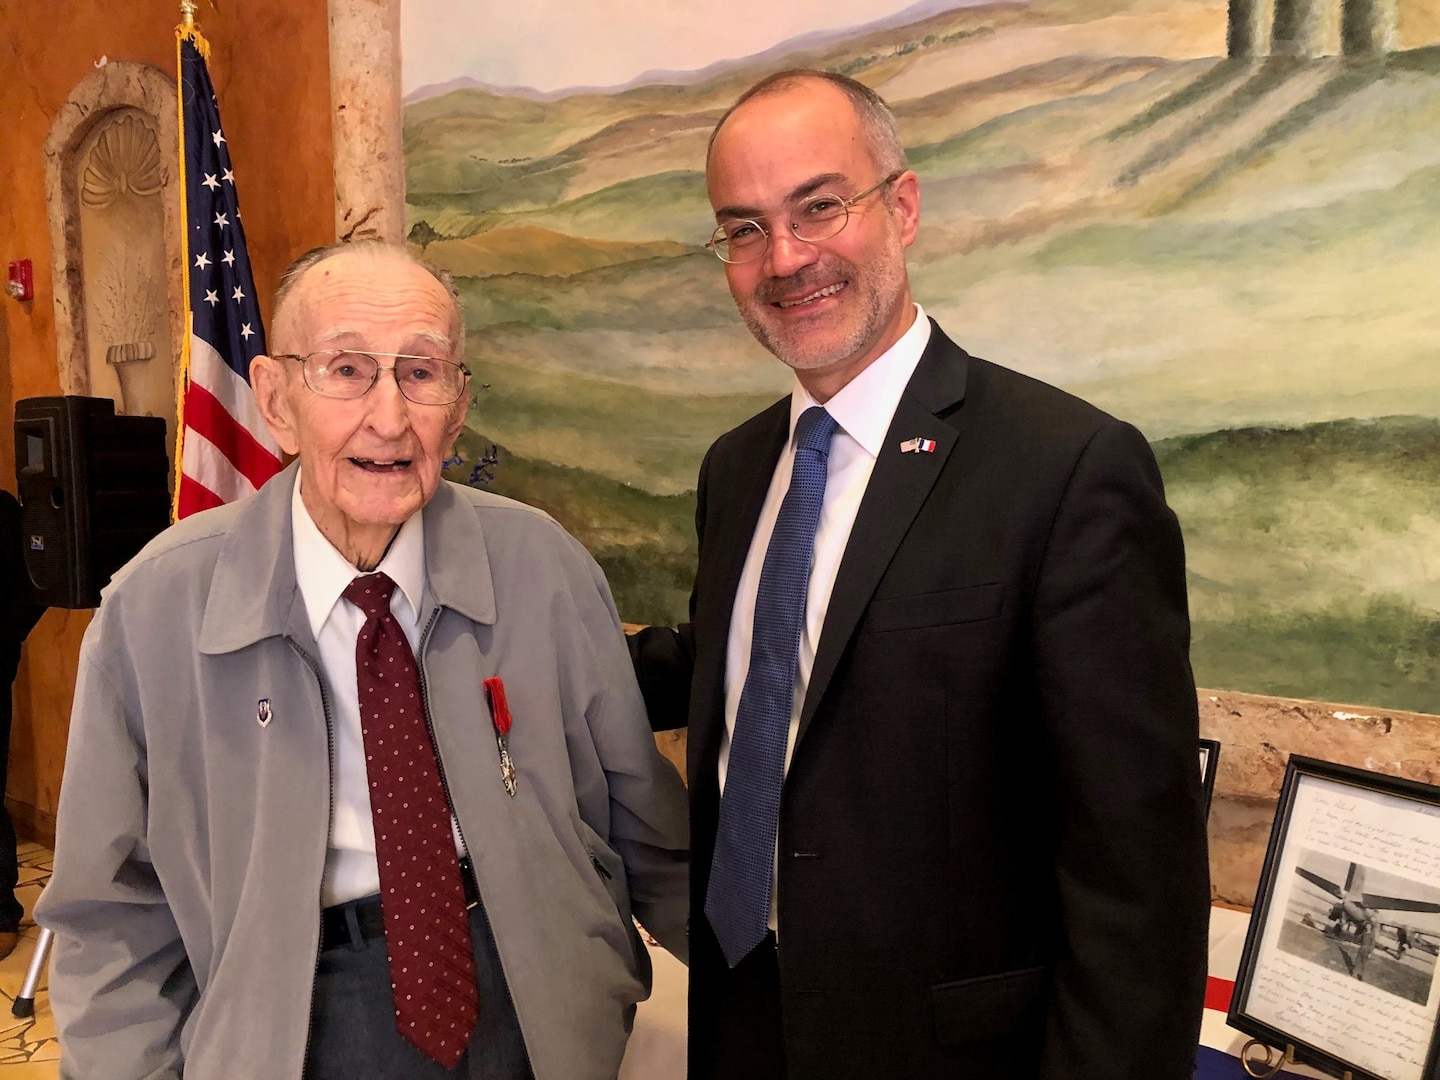 Long-time San Antonio resident and United States Army Air Corps World War II veteran Roland Dullnig (left) stands with the Consul General of France in Houston, Alexis Andres, after being presented the French Legion of Honor medal in a ceremony which included family and friends in San Antonio, Texas, Feb. 8, 2020.  The French Legion of Honor is a prestigious medal and has been recently awarded by the people of France to American Veterans who fought for the liberation of France during World War II. (U.S. Air Force photo / Maj. Kim Garbett)